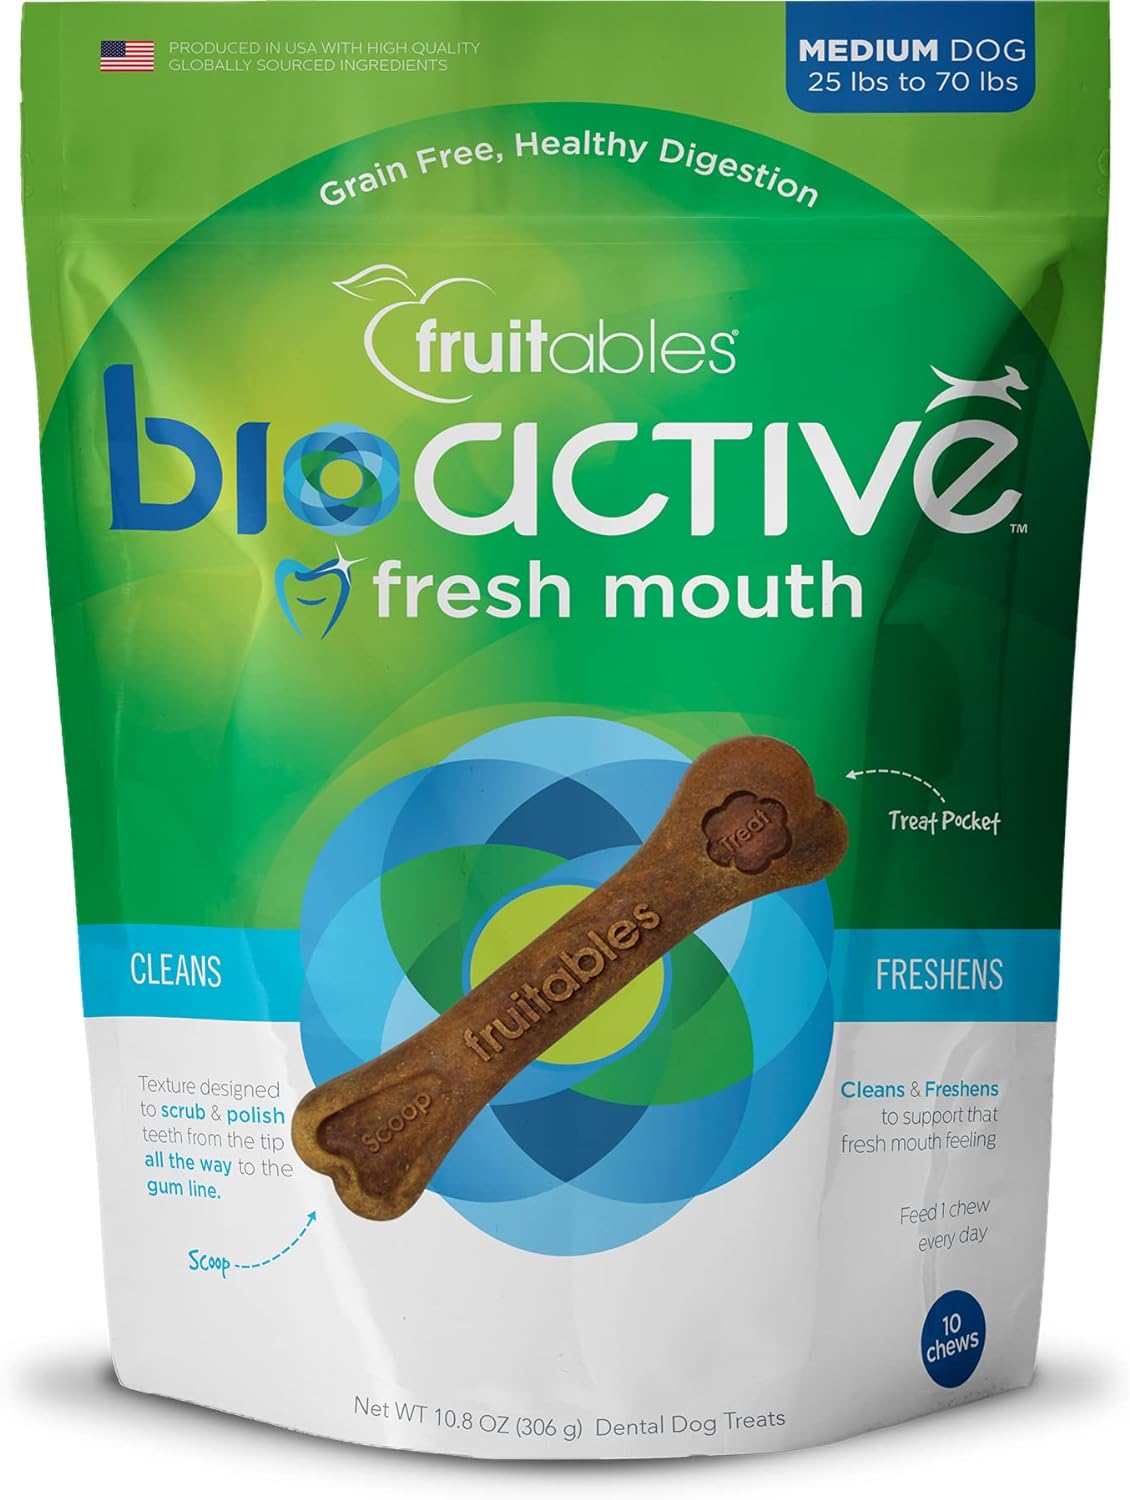 Fruitables Bioactive Dental Chews | Gluten and Grain-free Dental Treat | Superfood Formulated | Medium Dogs | 10 count